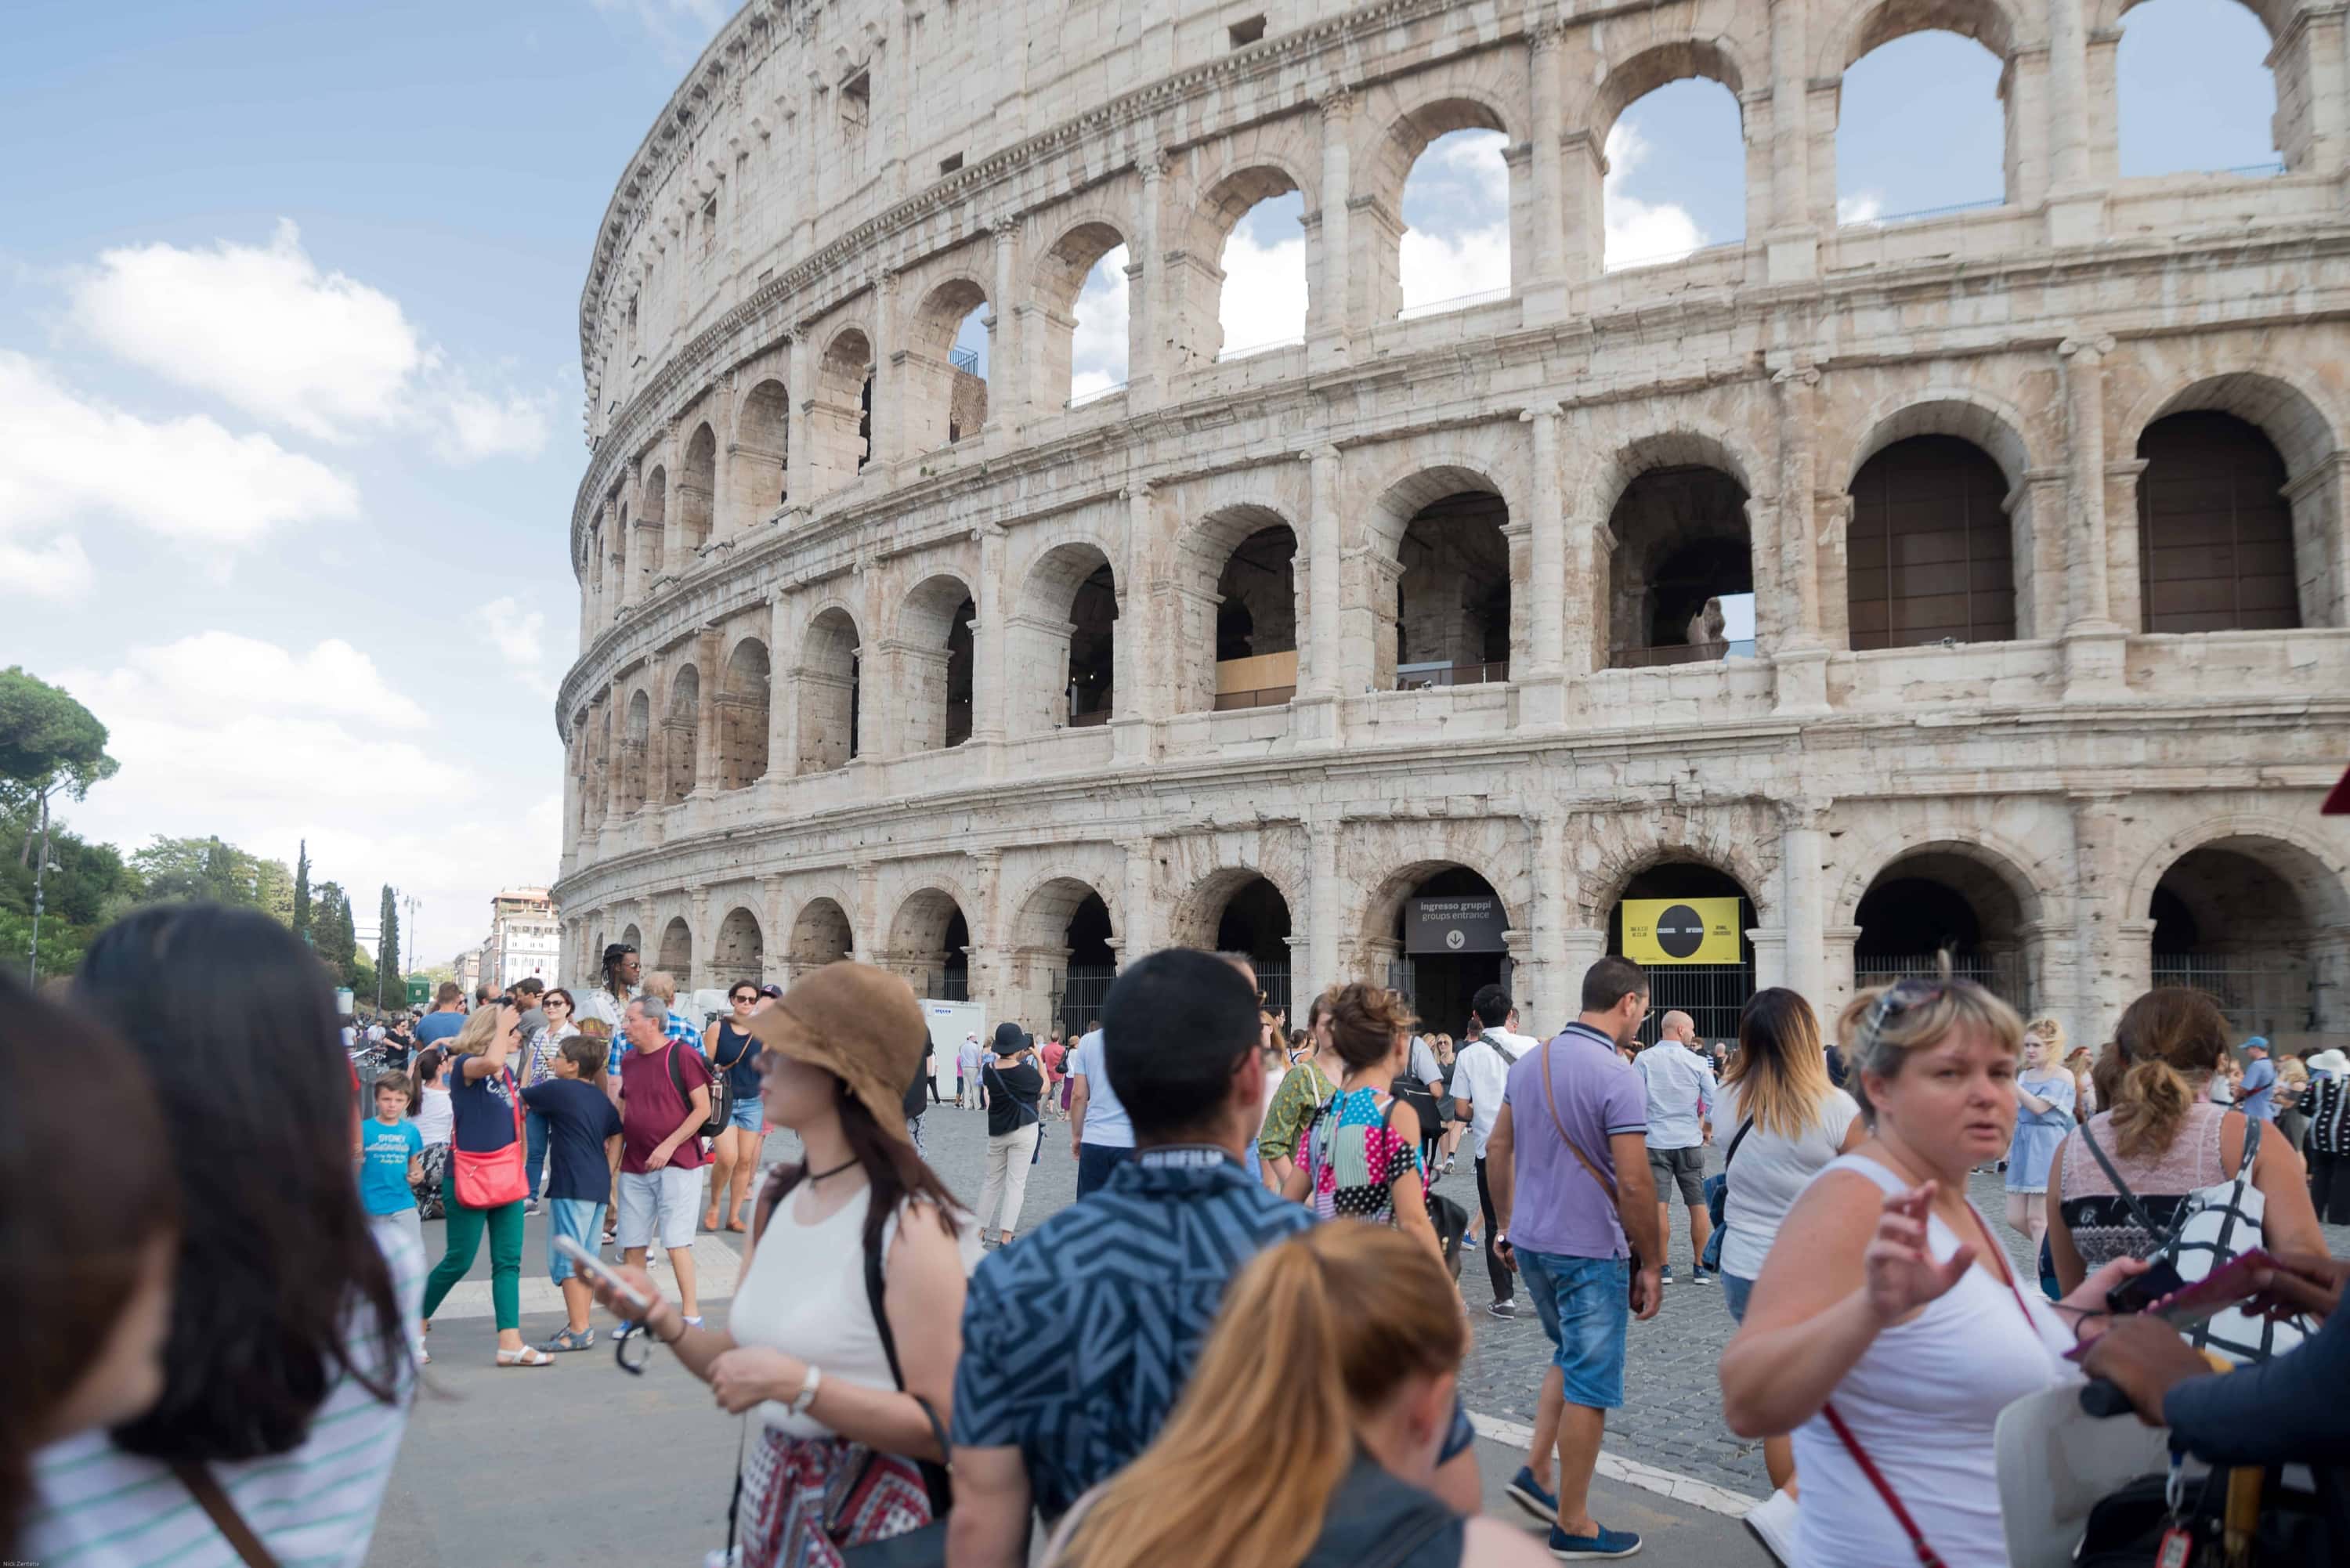 Update on free admission to the Colosseum in Rome Italy. 